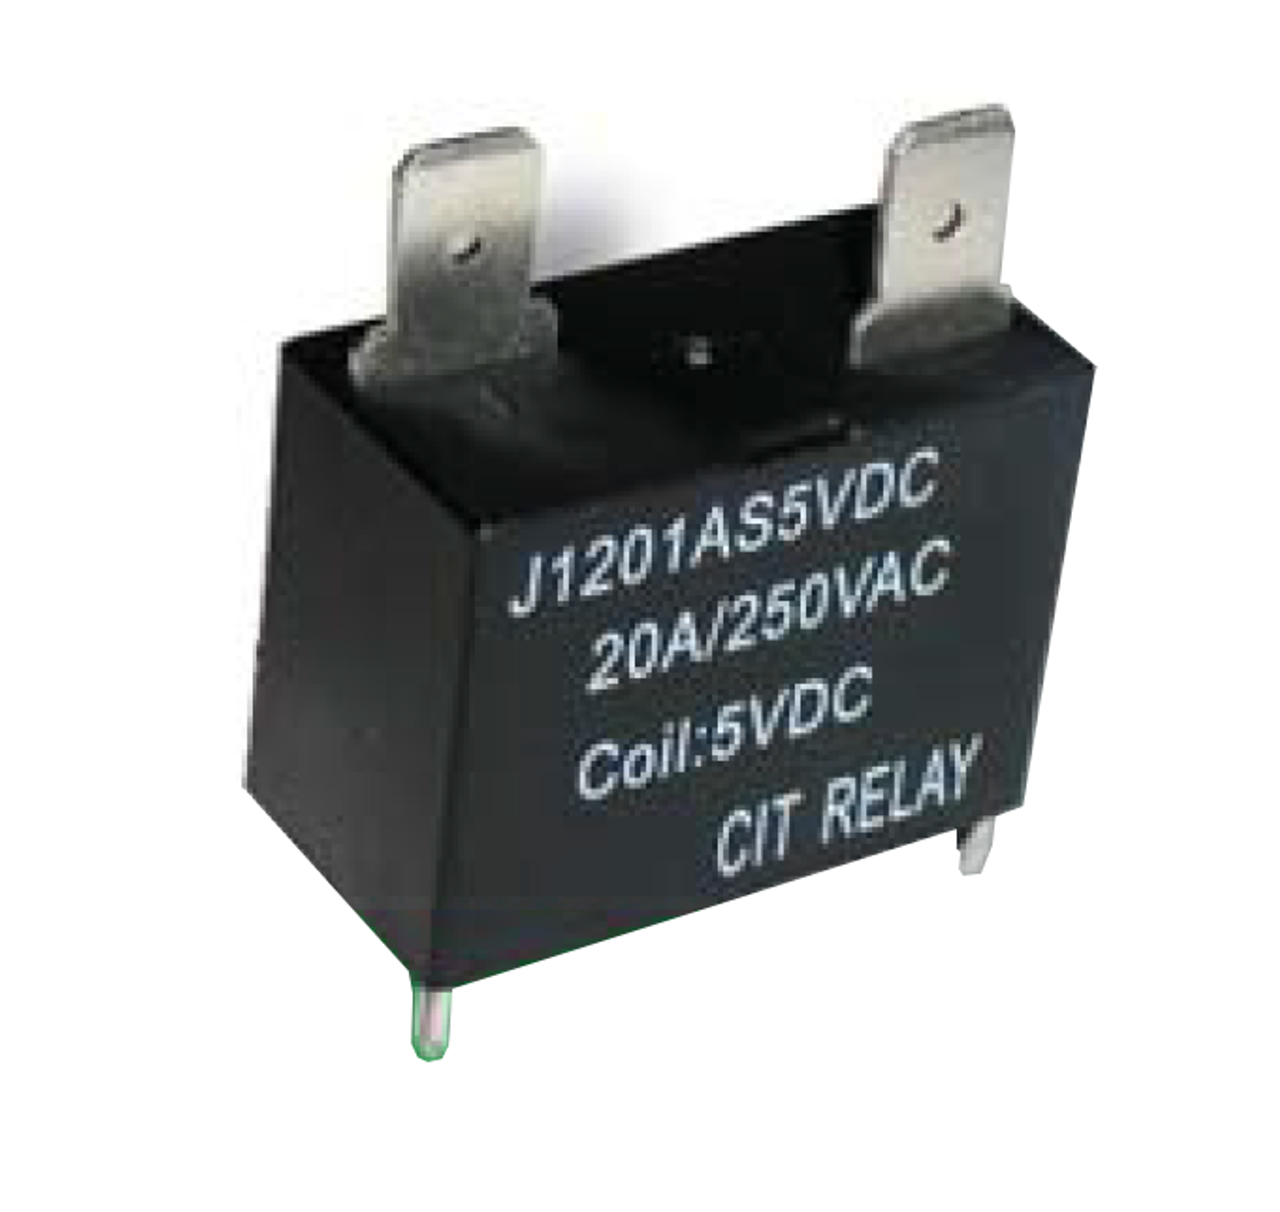 CIT Relay and Switch J1201AC48VDC Power Relays